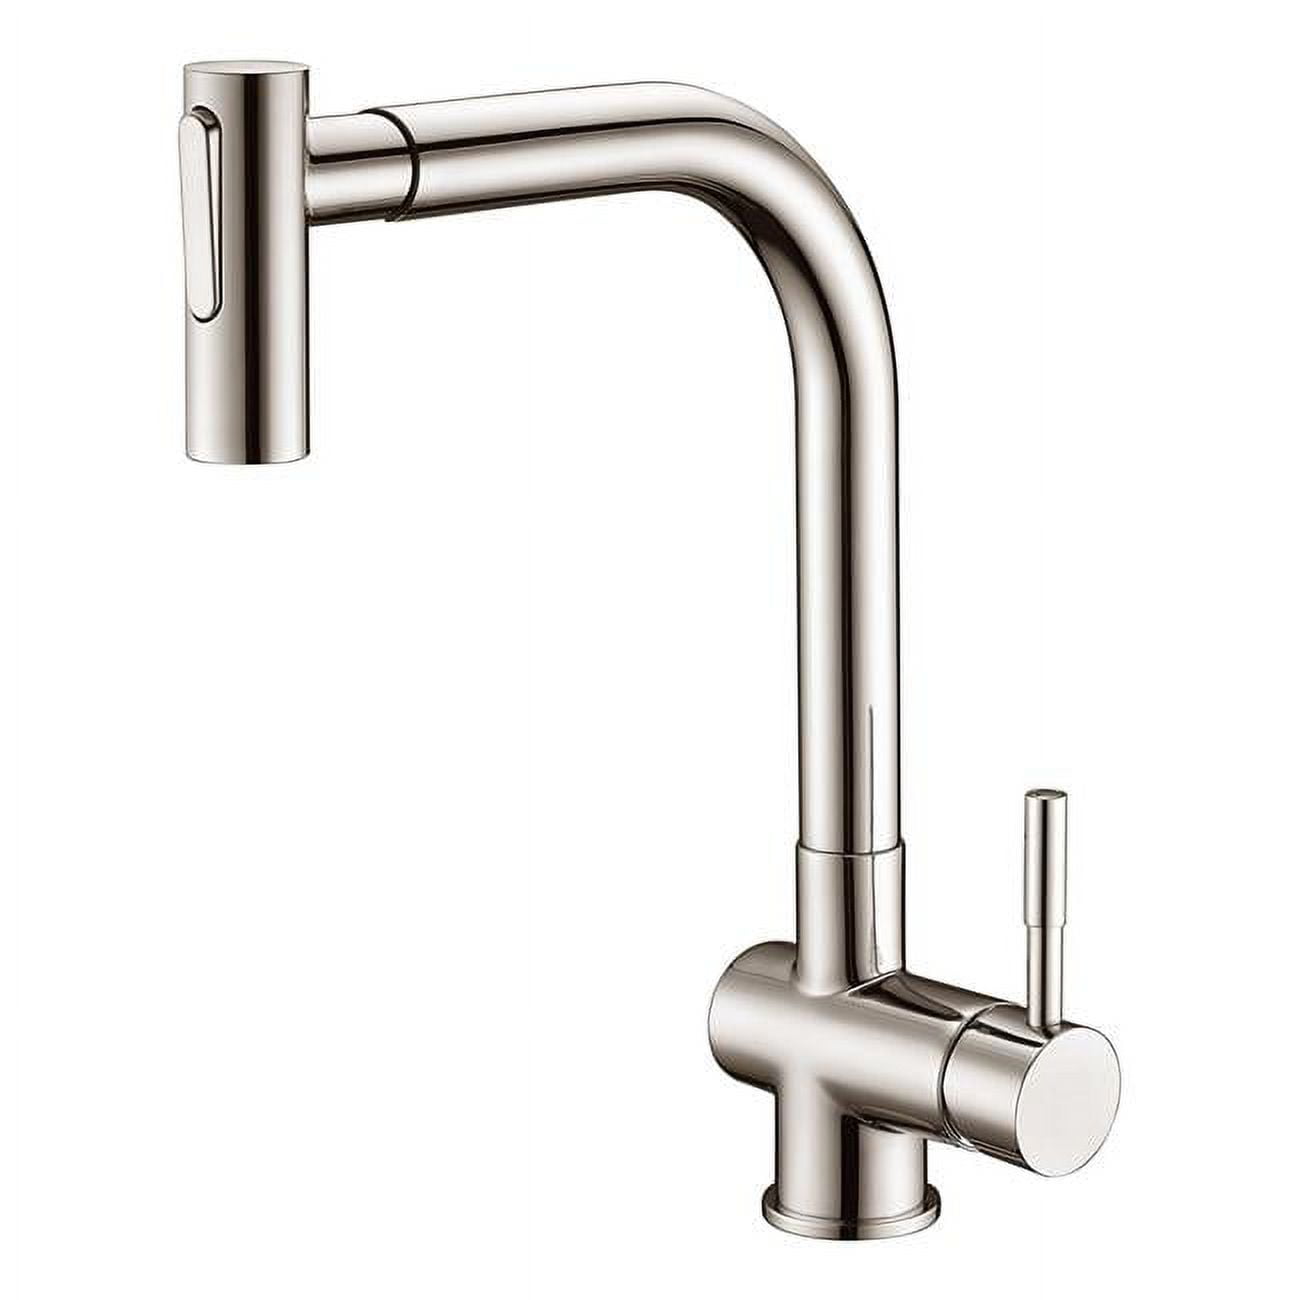 Ab27 1601bn Single-lever Lavatory Faucet, Brushed Nickel